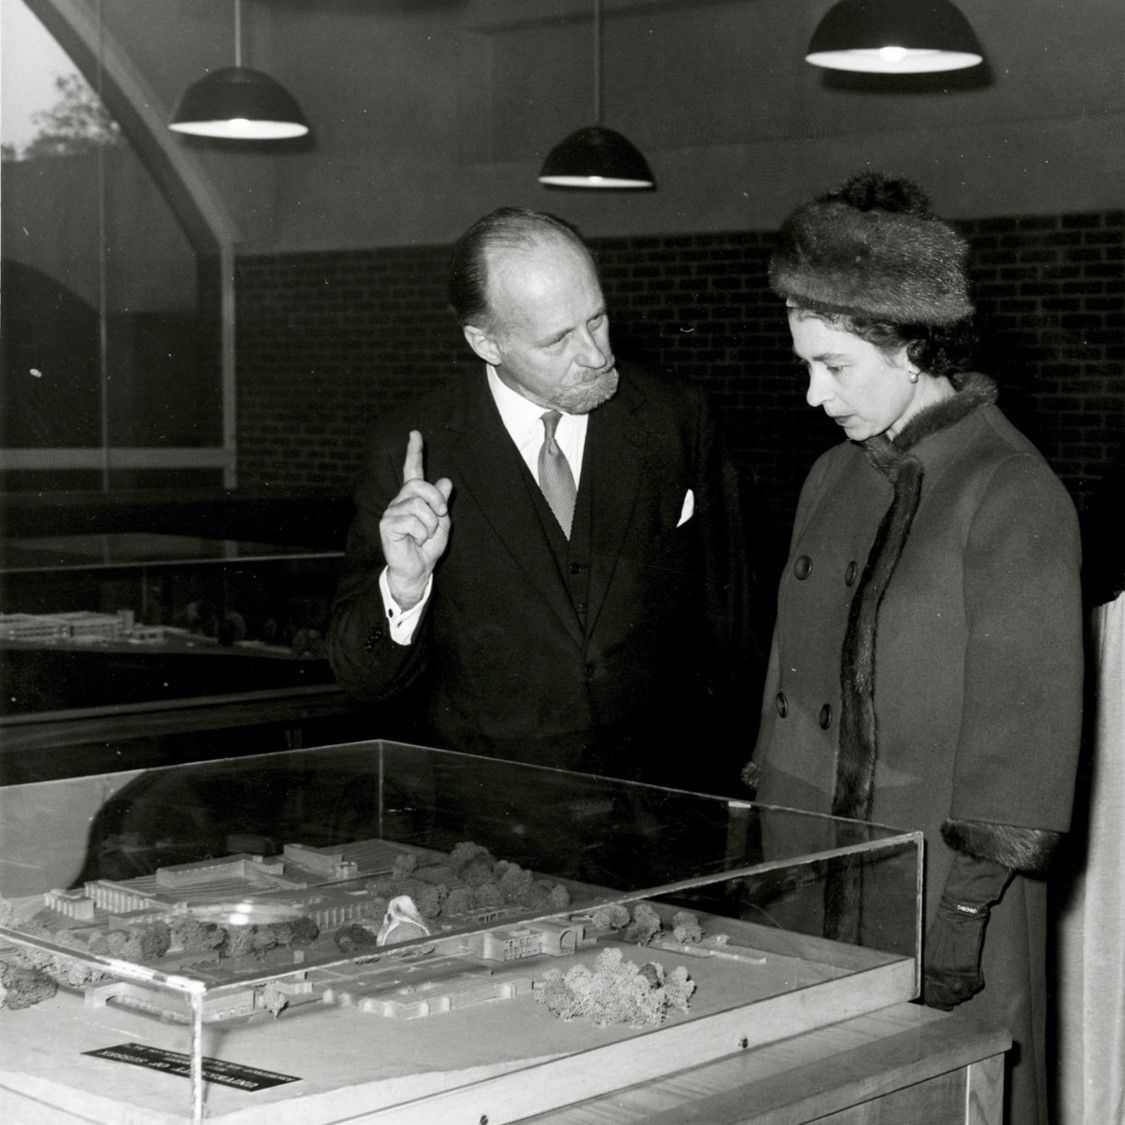 The Queen takes a keen interest in the work of Basil Spence, who designed the Sussex campus.